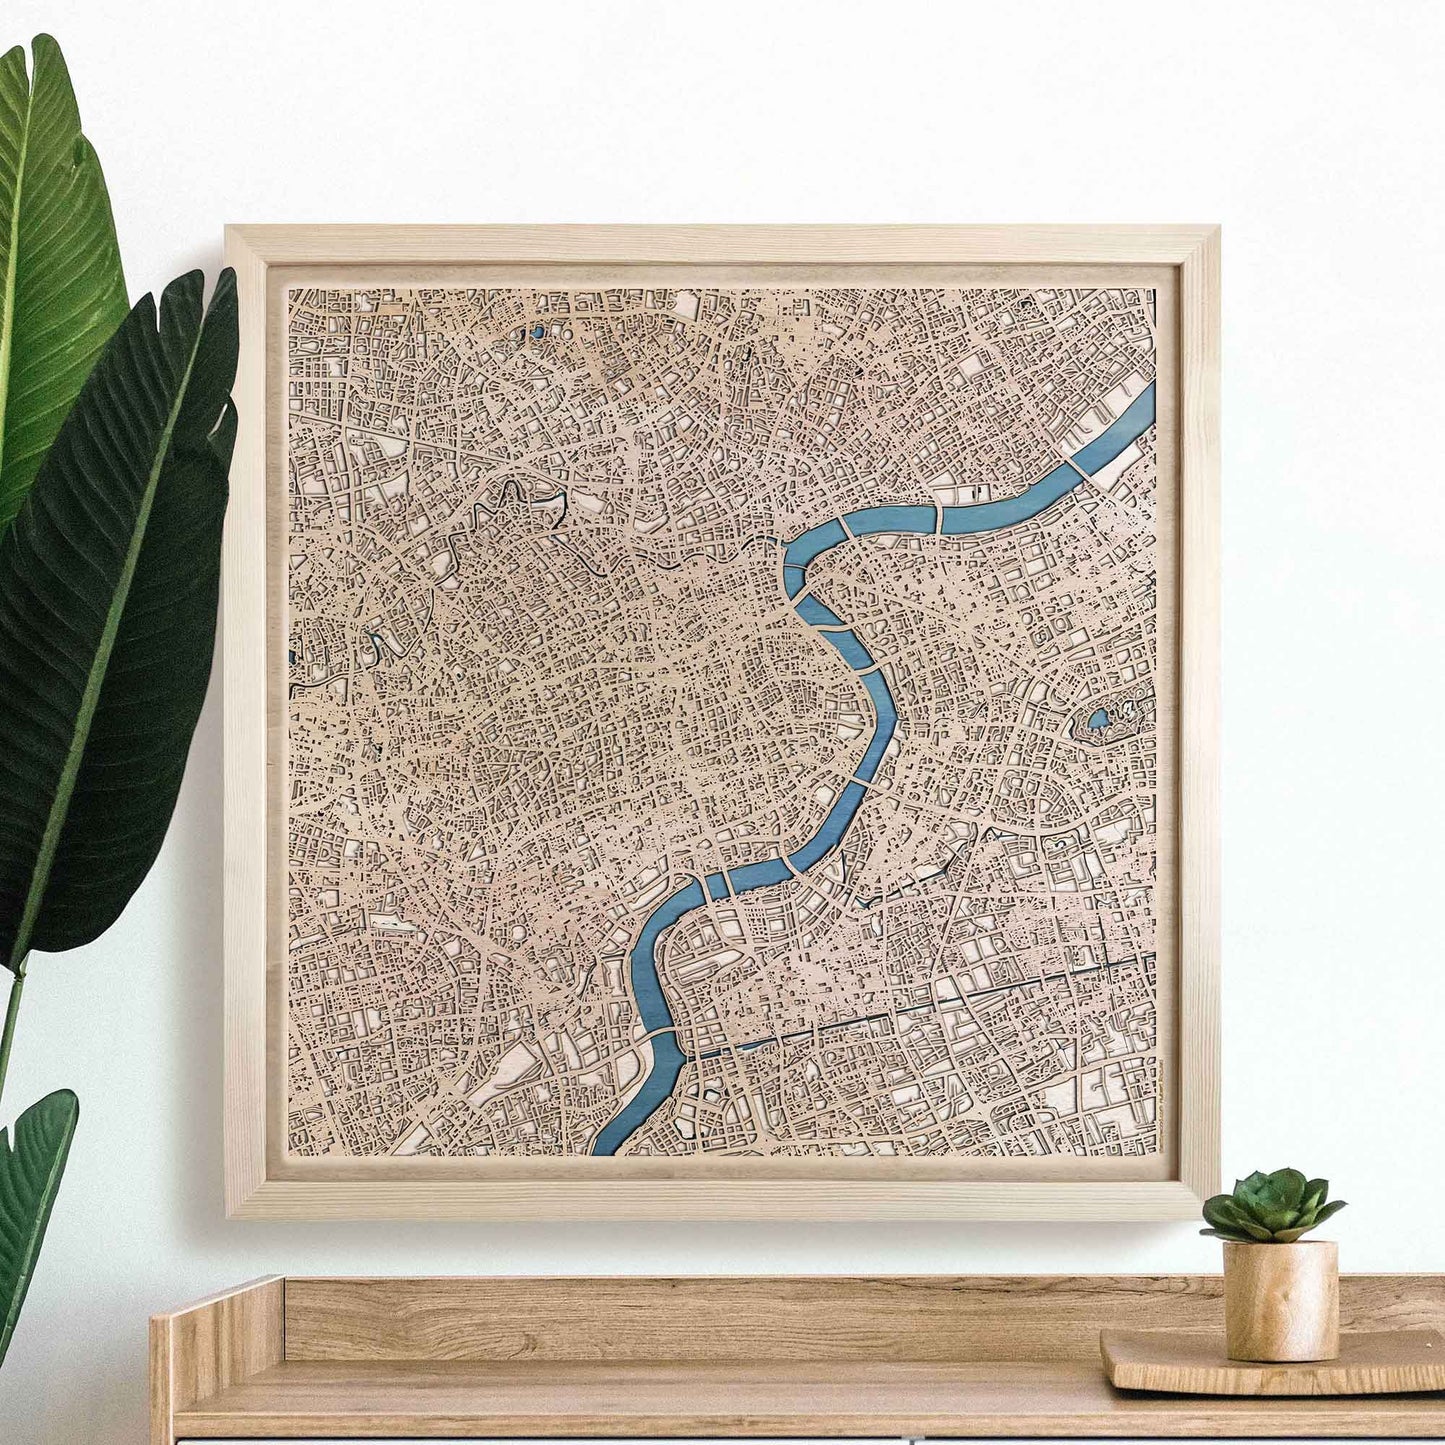 Shanghai Wooden Map by CityWood - Custom Wood Map Art - Unique Laser Cut Engraved - Anniversary Gift